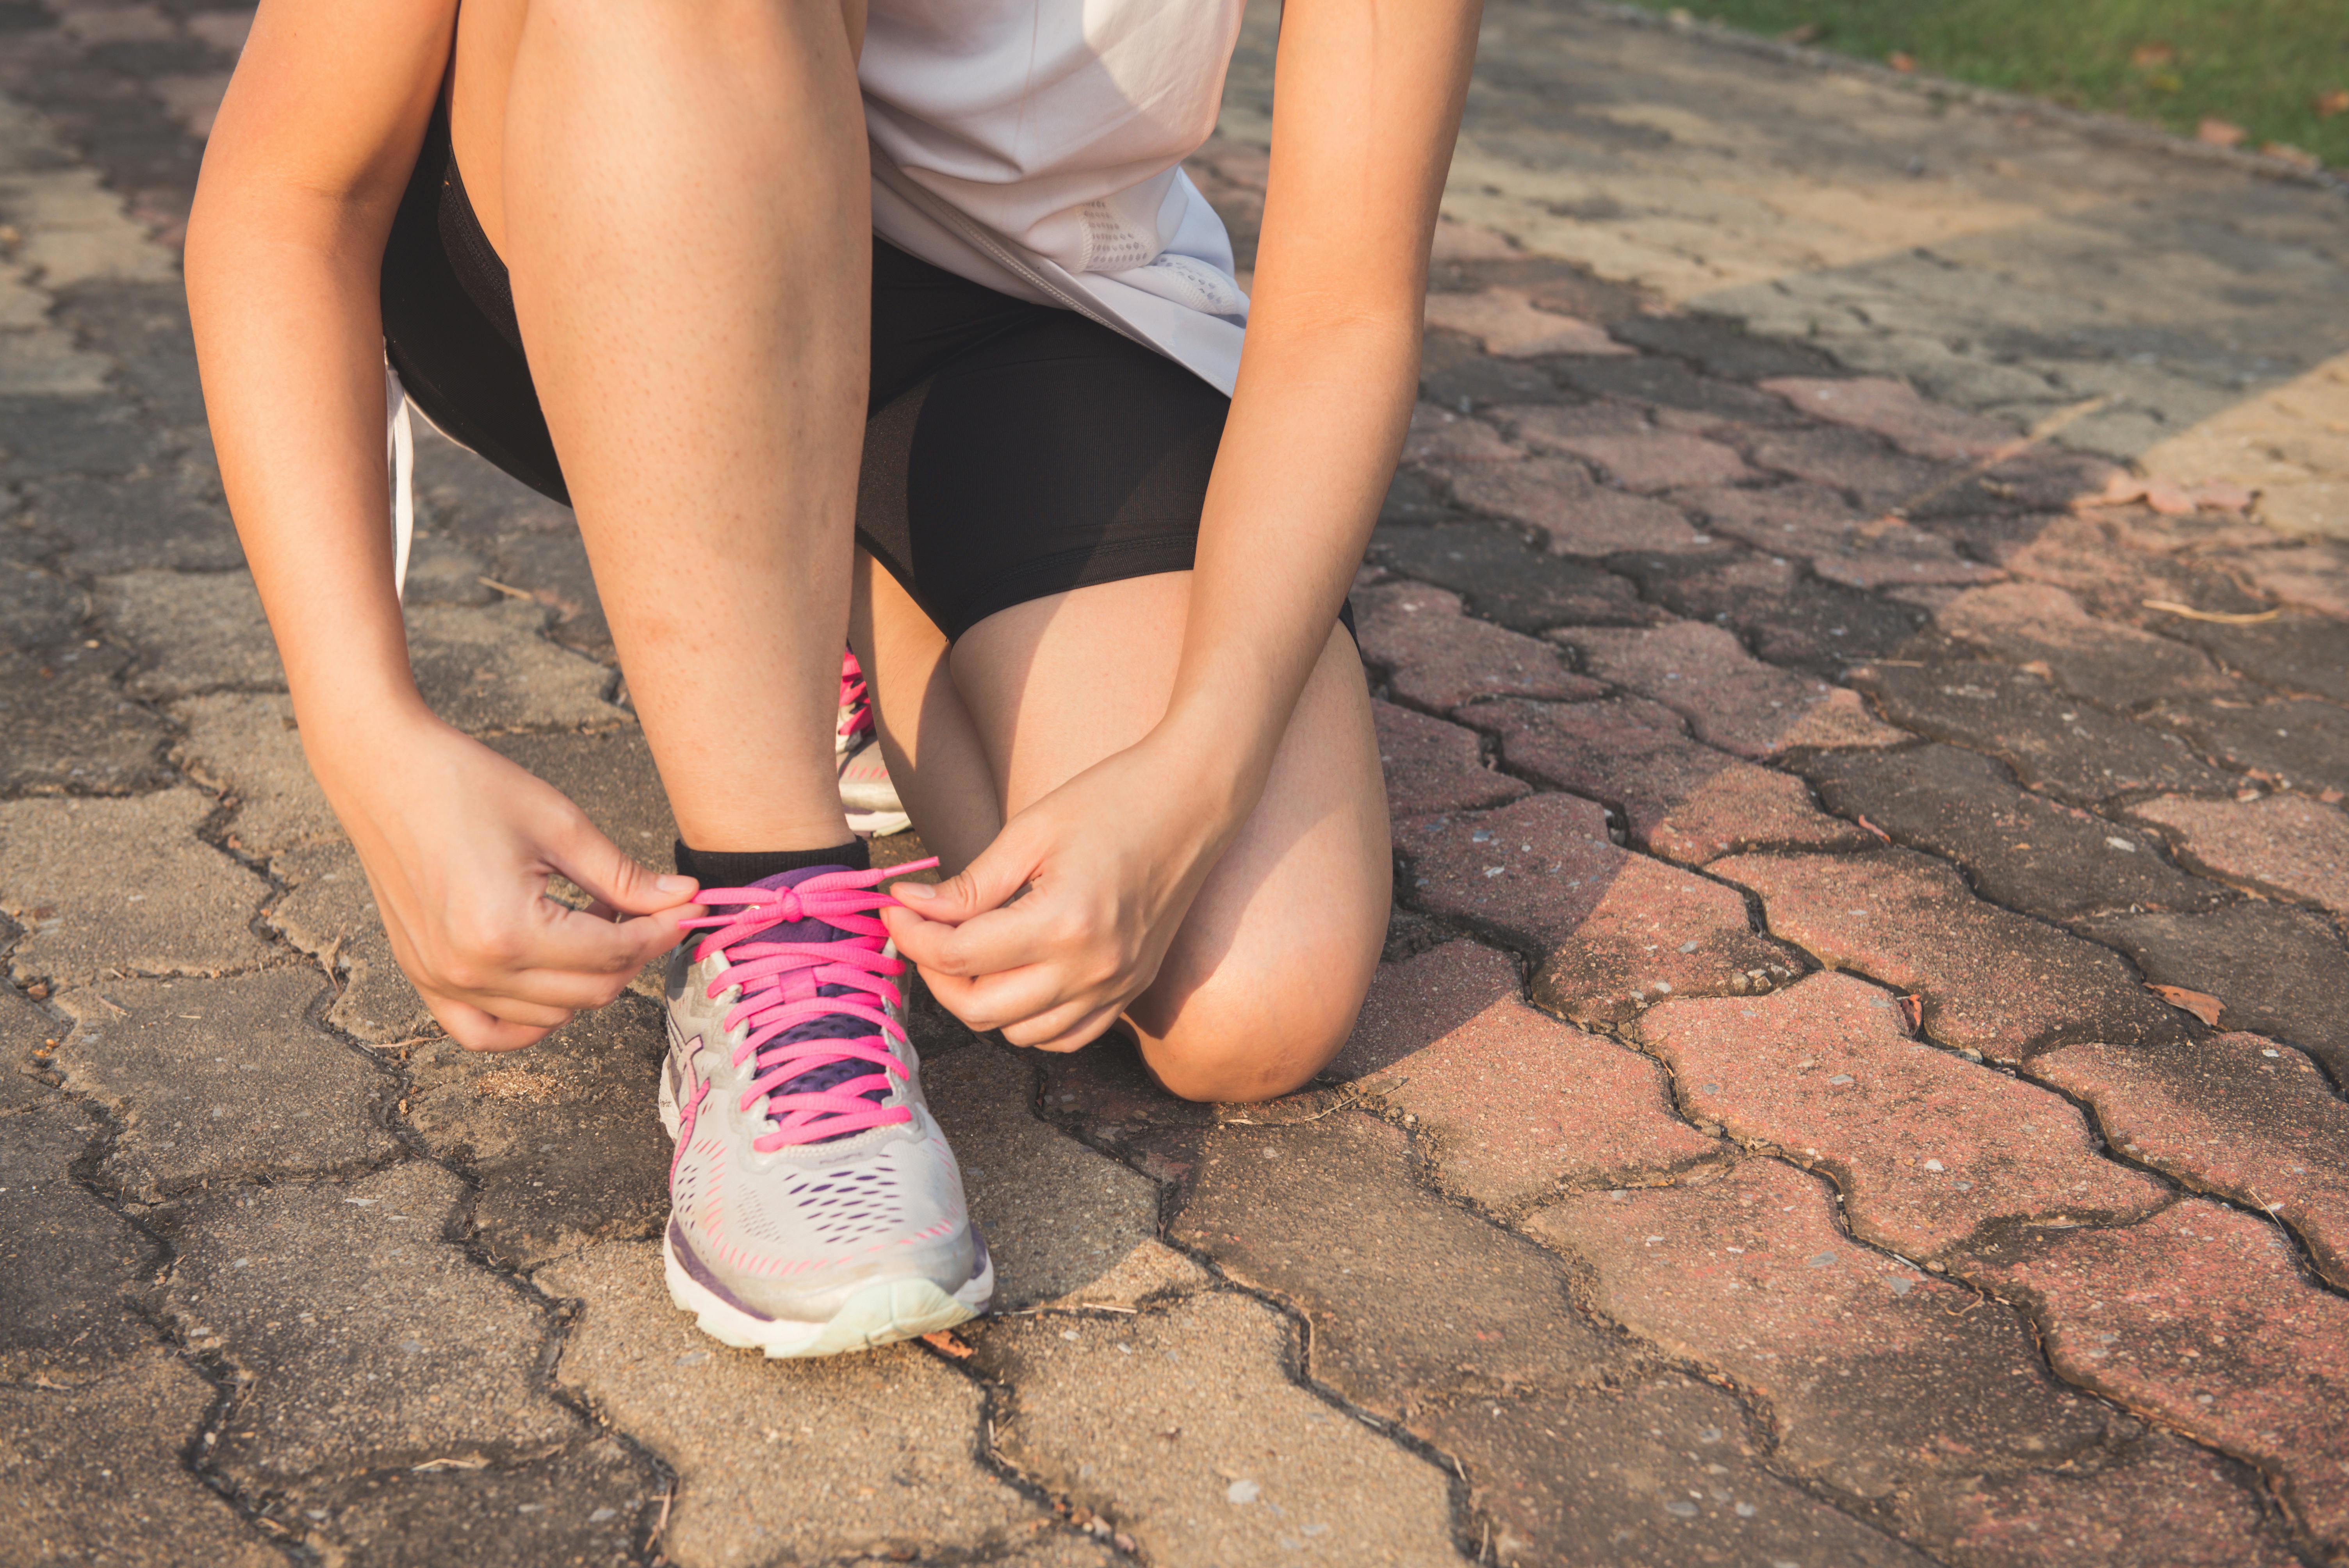 Stock image of a woman tying her shoe on a run.